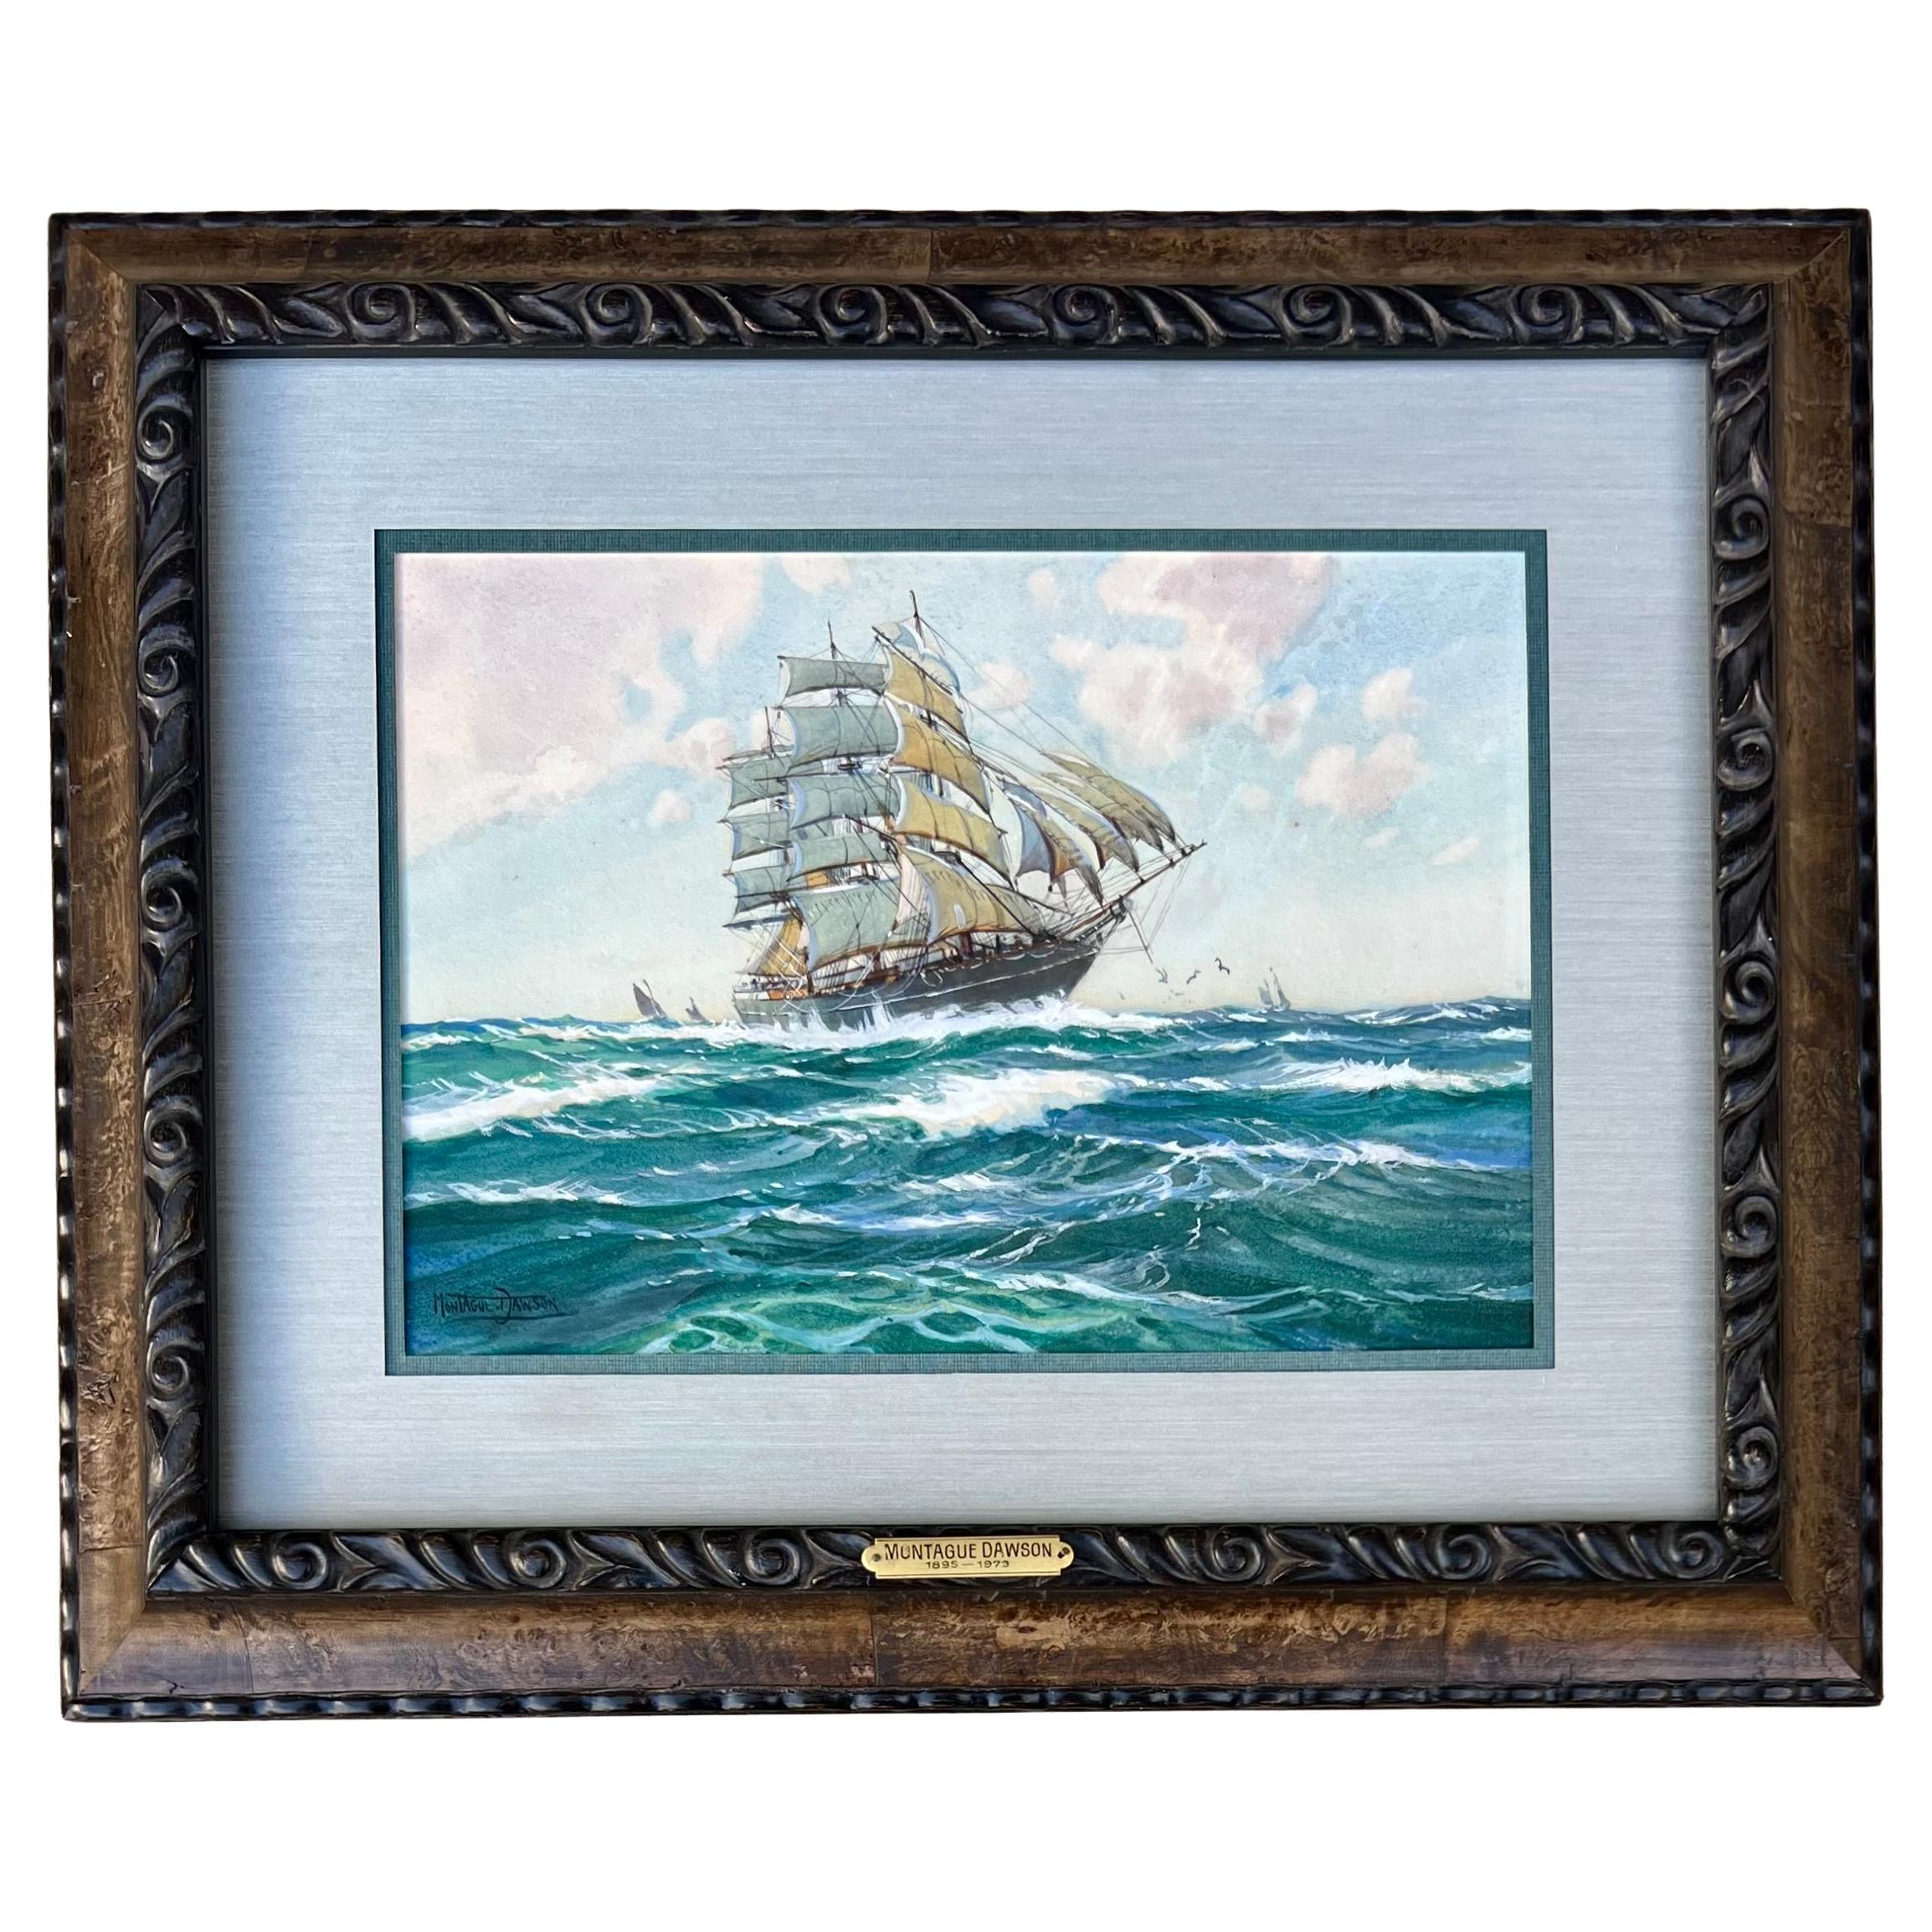 "At Full Sail" A Clipper Ship Watercolor by Montague Dawson For Sale